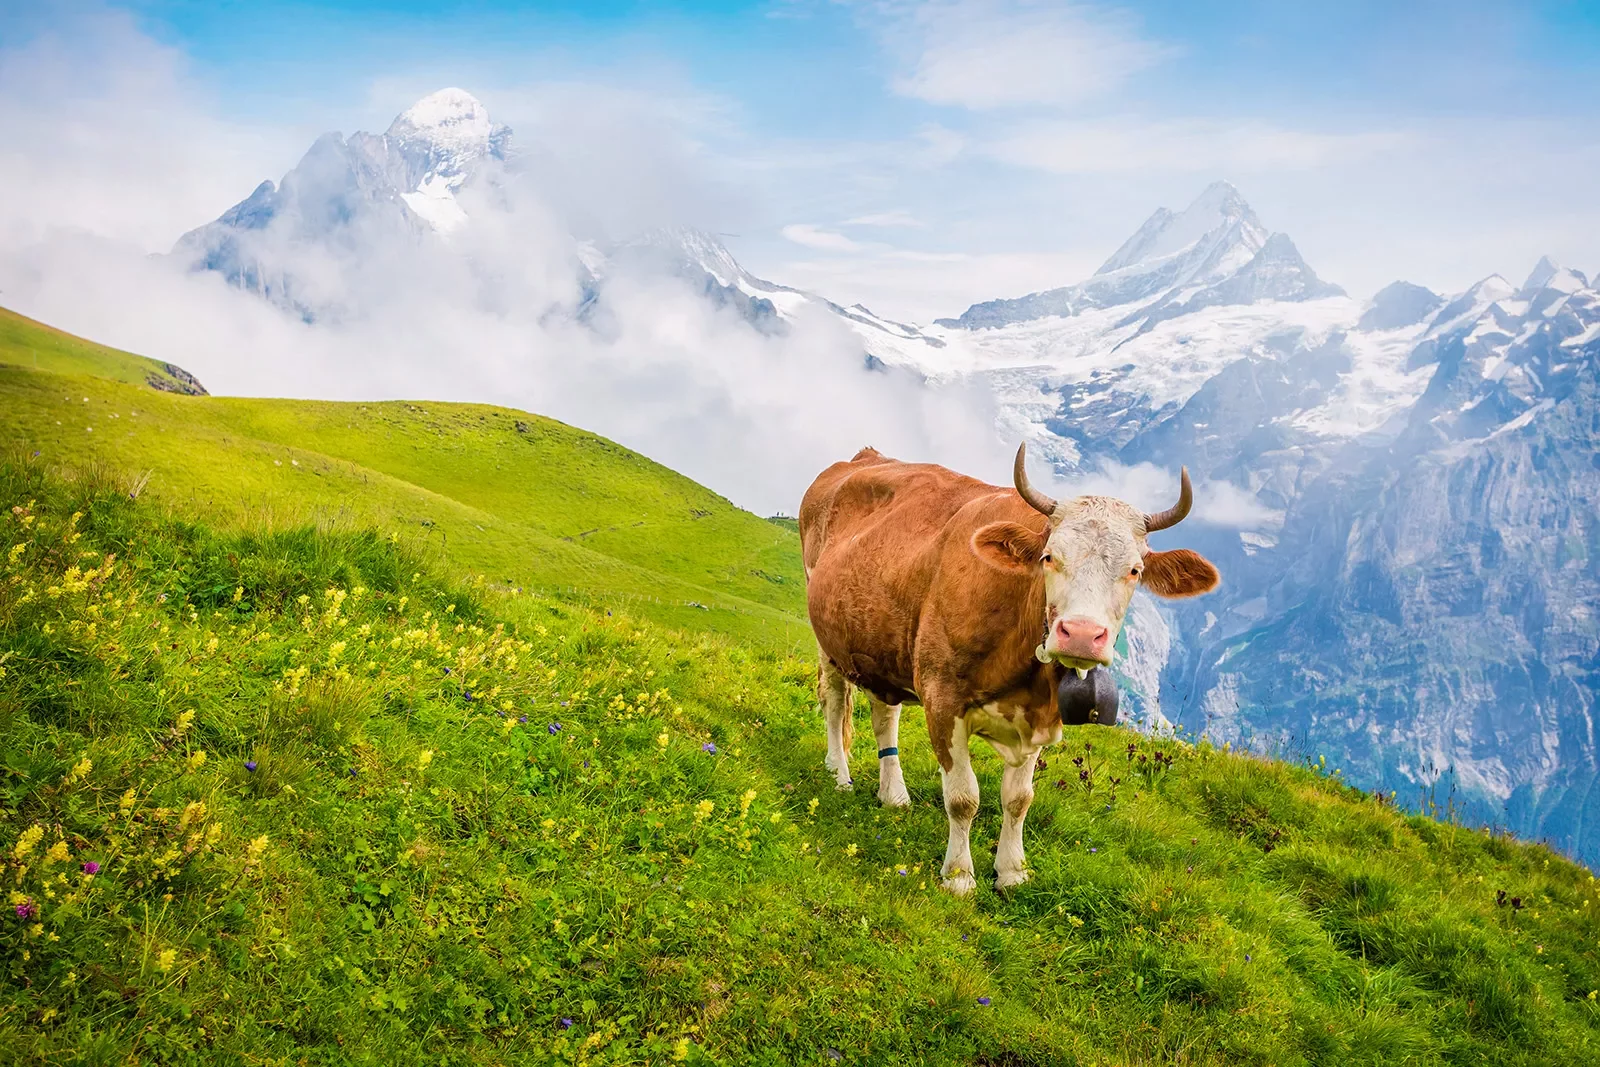 Cow on mountaintop, large mountain range in background.